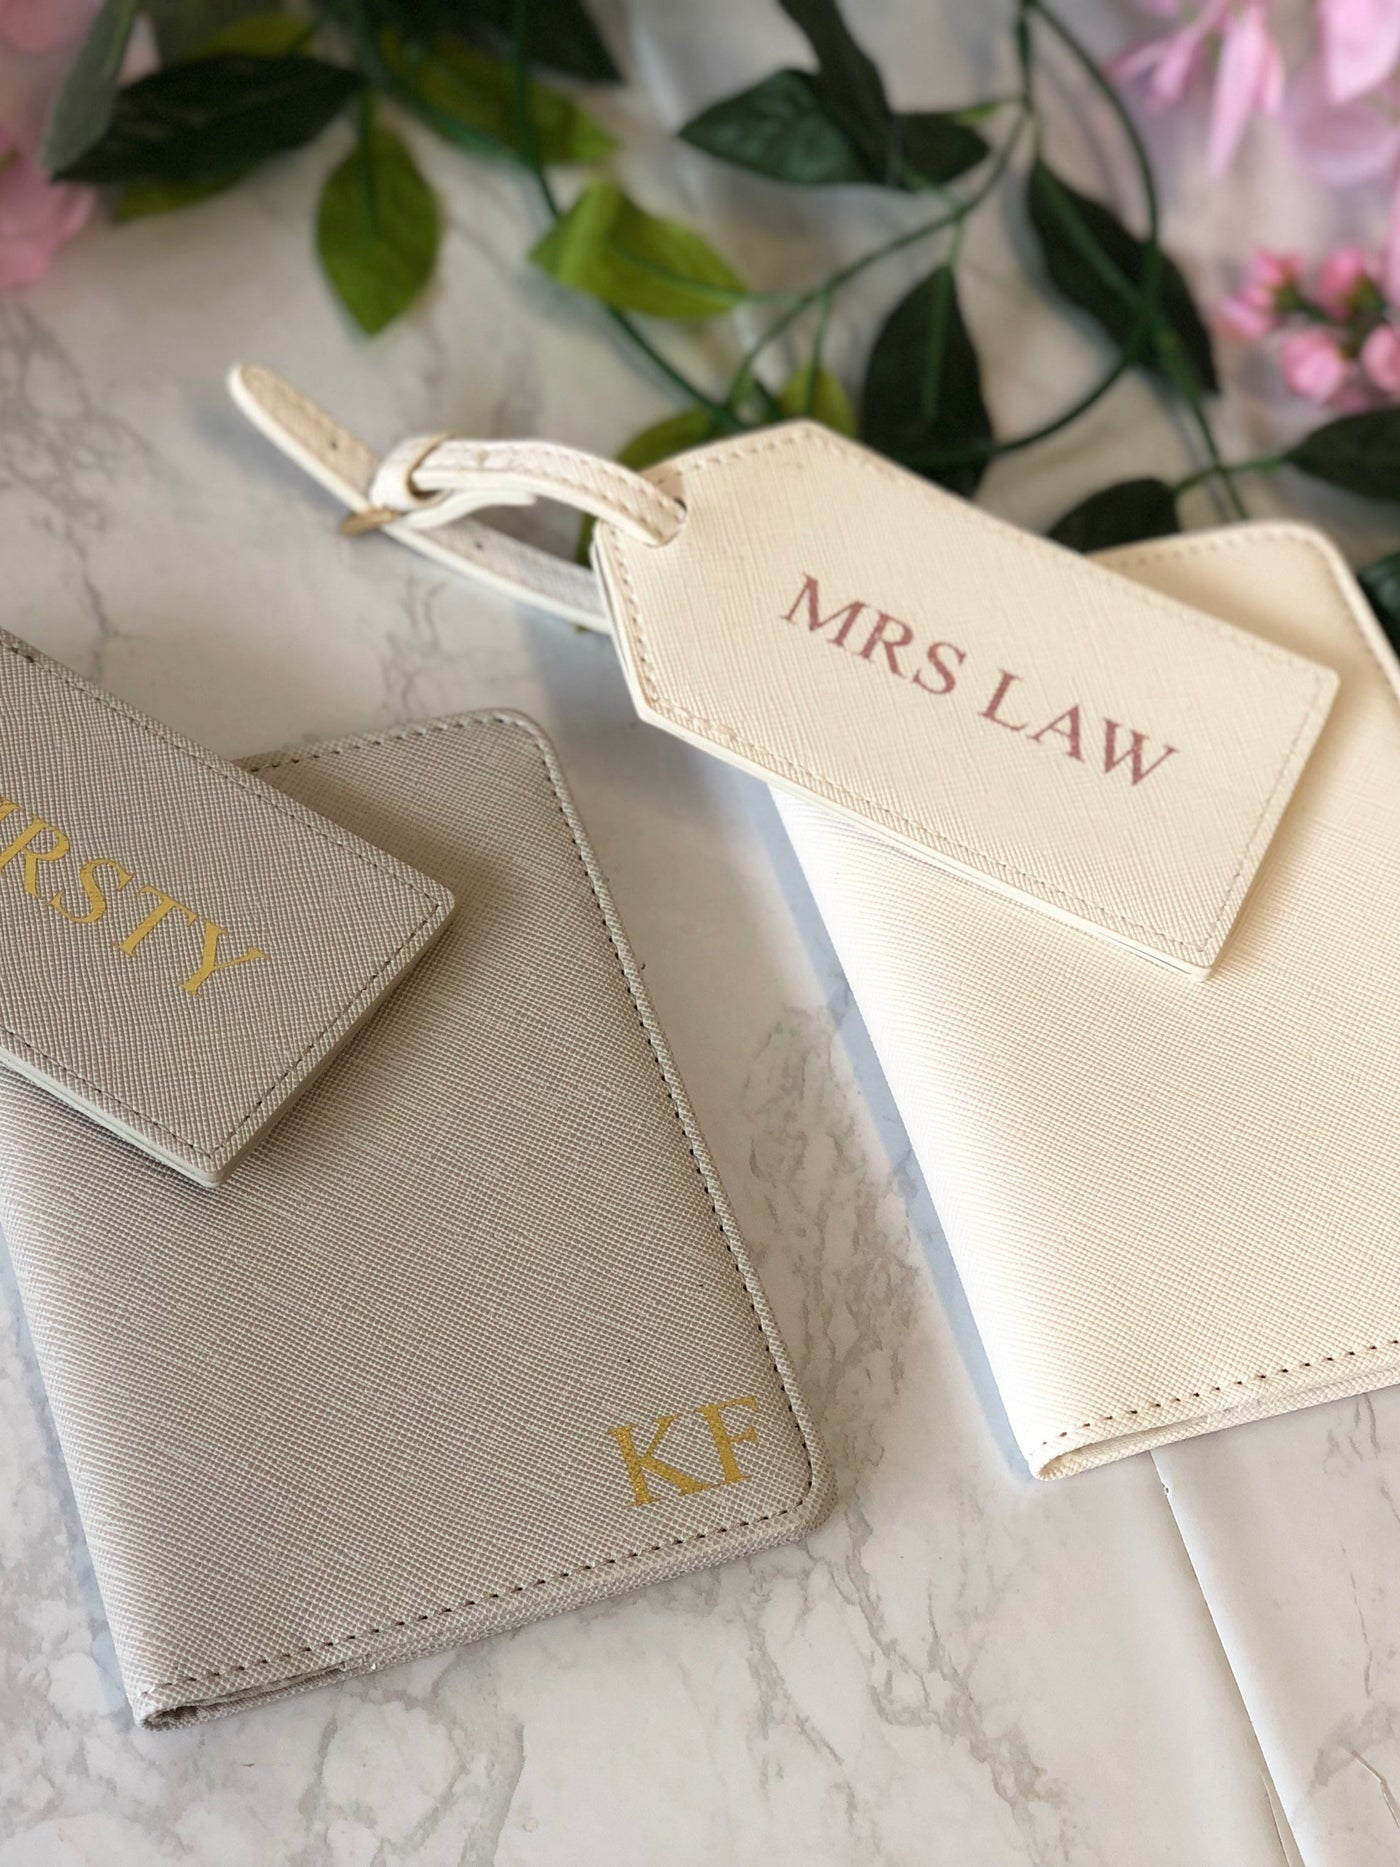 Personalised Passport and Luggage Tag Set